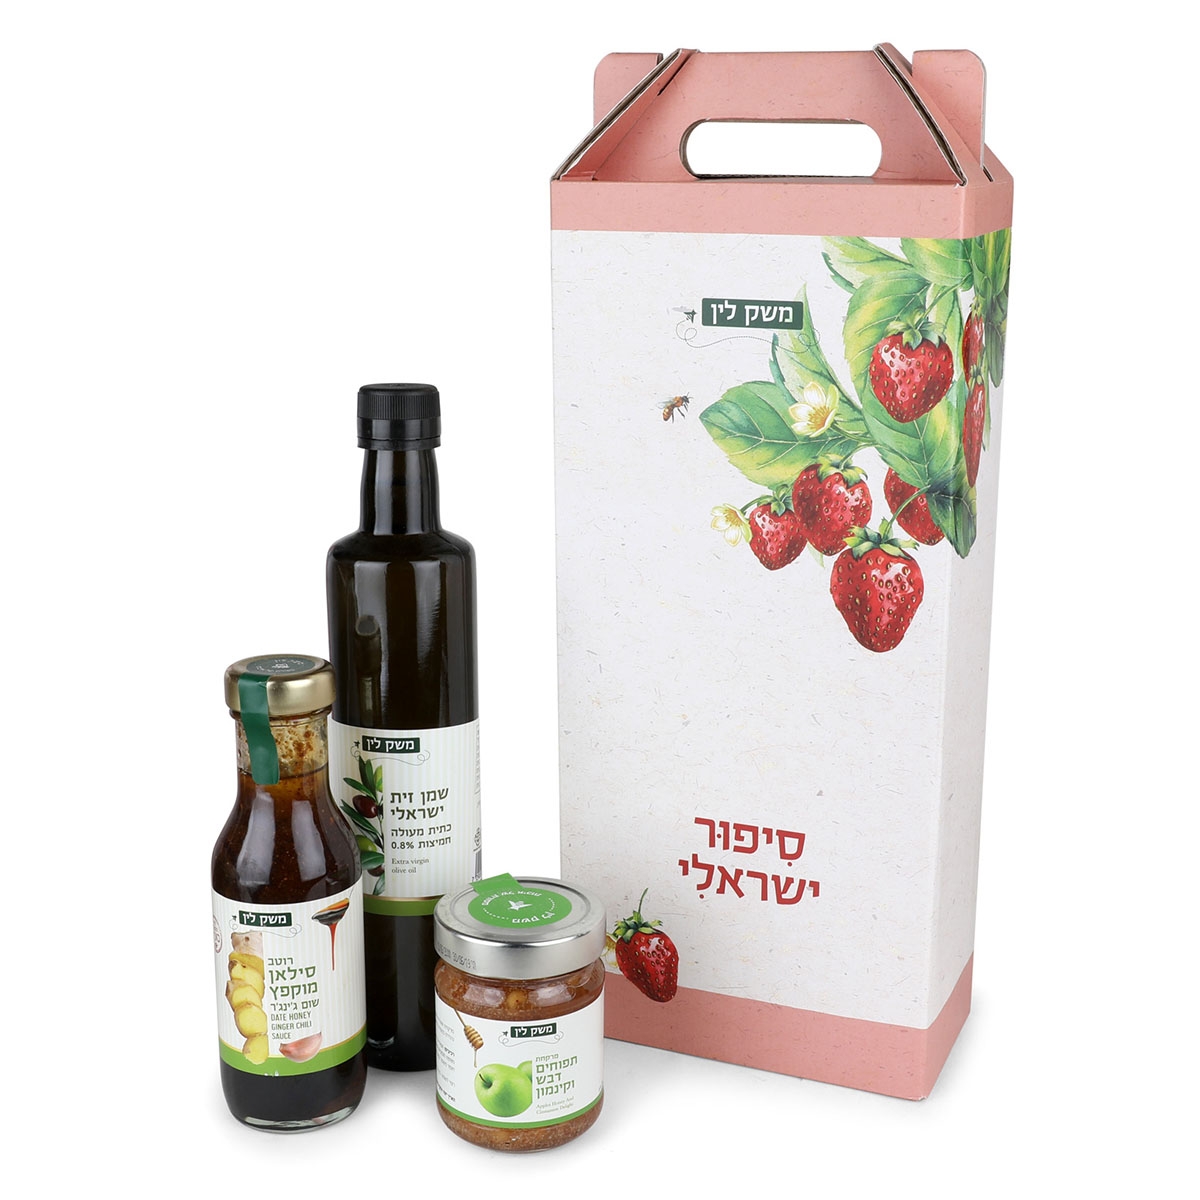 Lin's Farm All-Natural "Taste of Israel" Deluxe Gift Box - 1